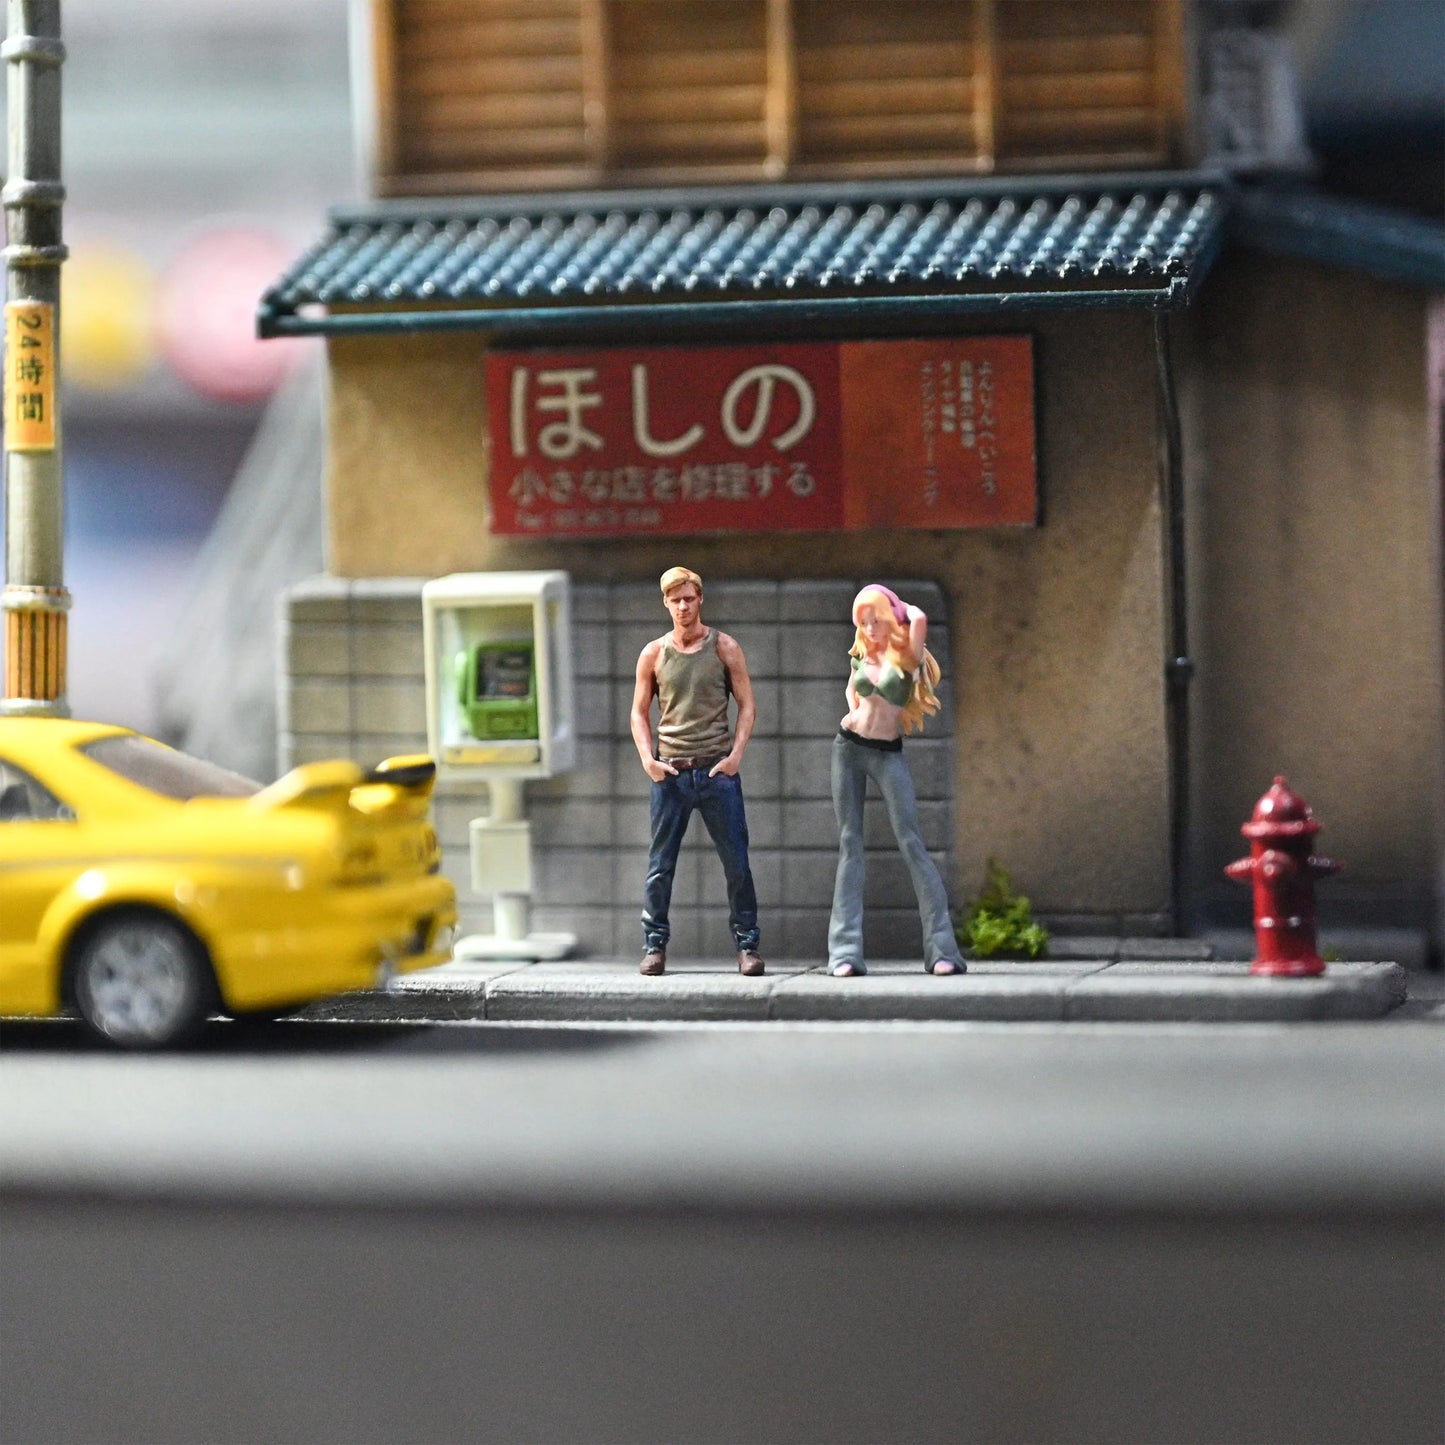 EHC Model Diorama 1/64 Scale Figurines Model Summer Men and Women Collection Miniature Hand-painted